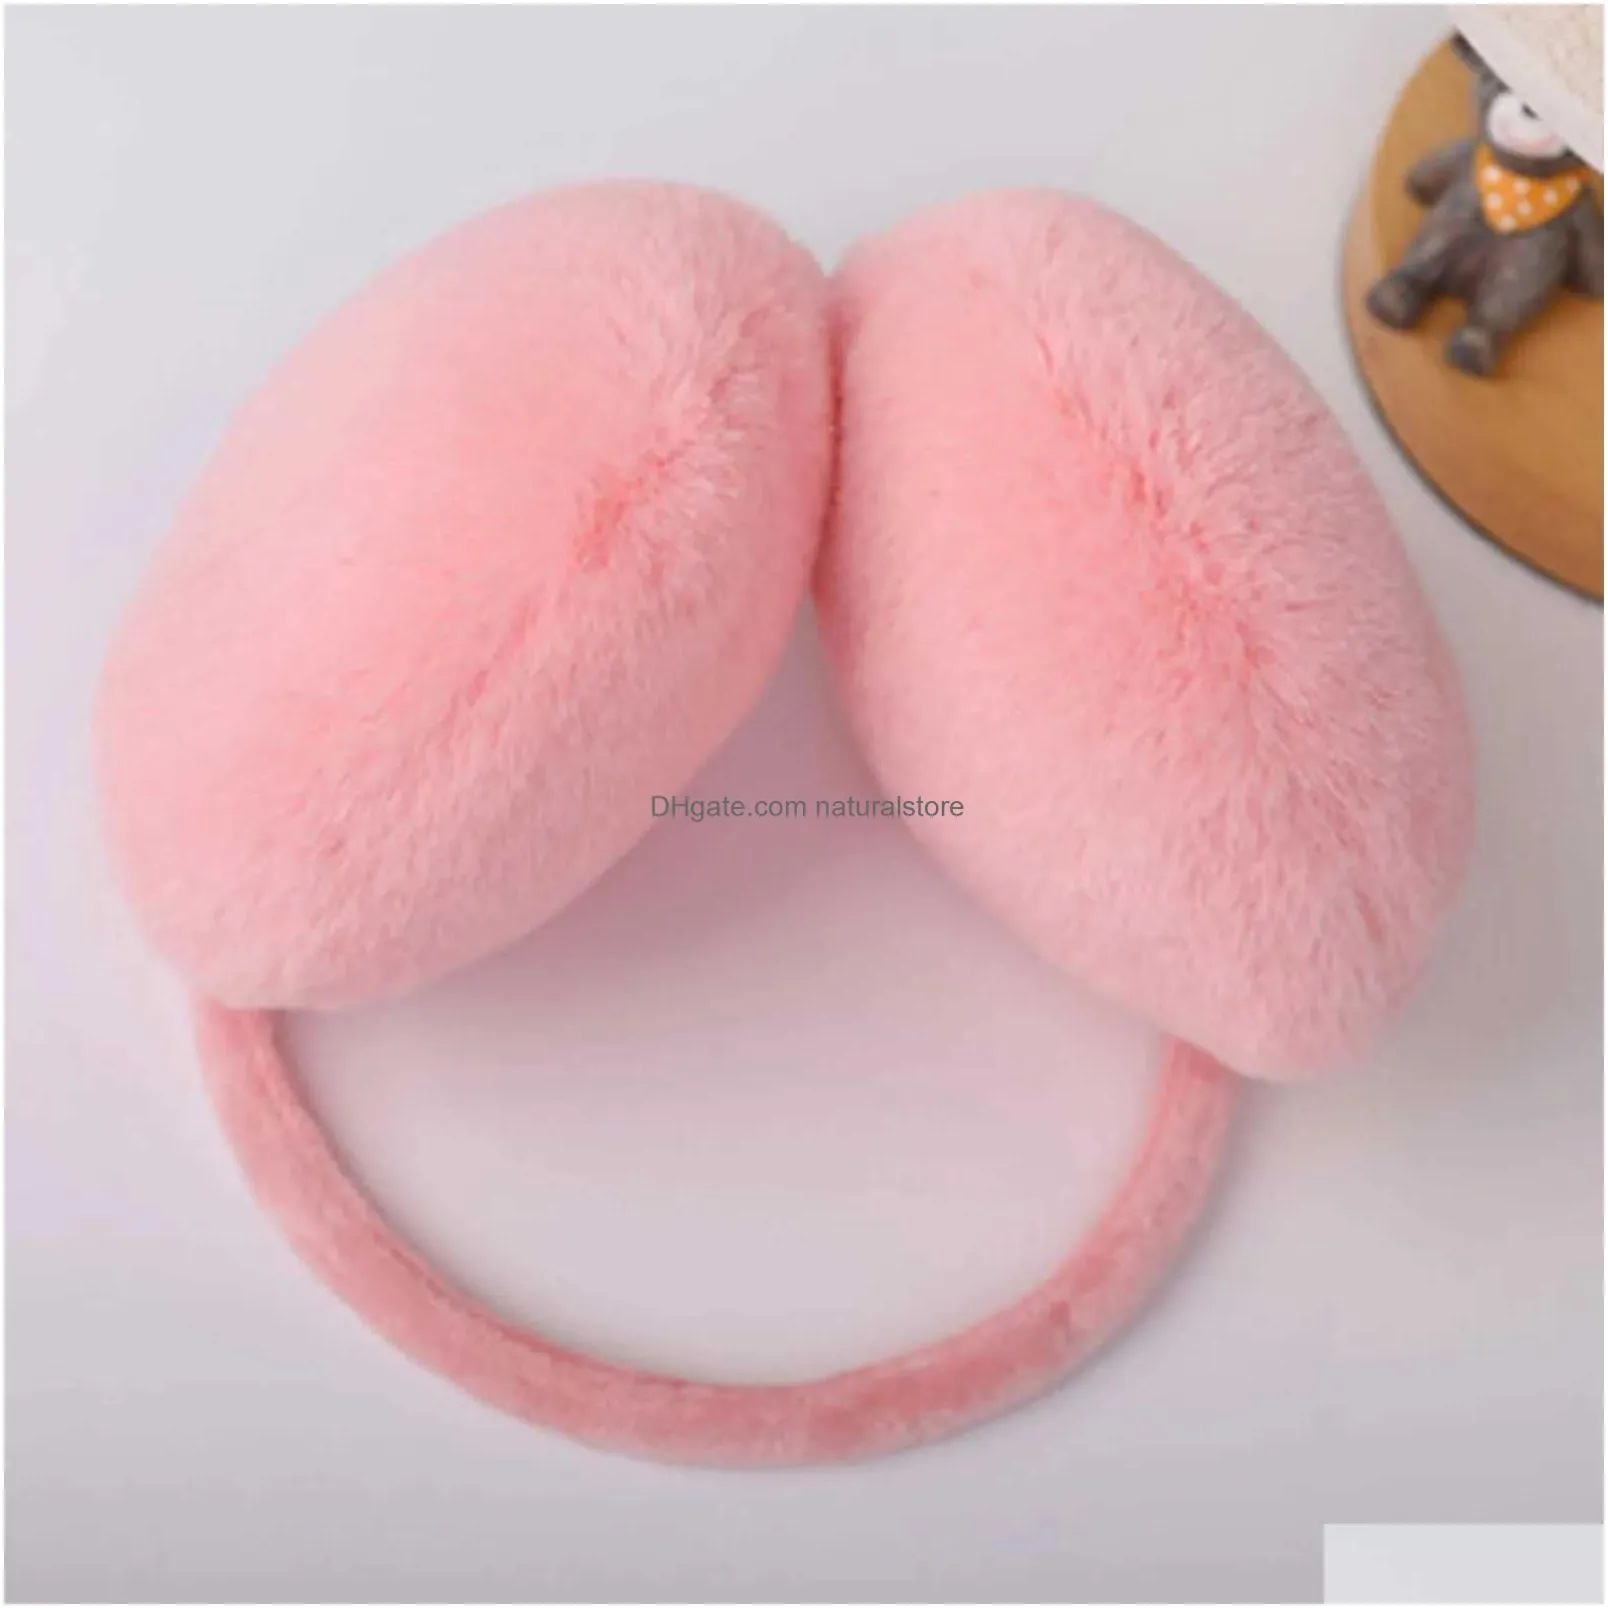 Ear Muffs Ear Muffs New Winter Earmuffs Warmth Plush Warm Ears Boy Girl Outdoor Solid Color Soft Cozy Casual R231009 Drop Delivery Fas Dhgft